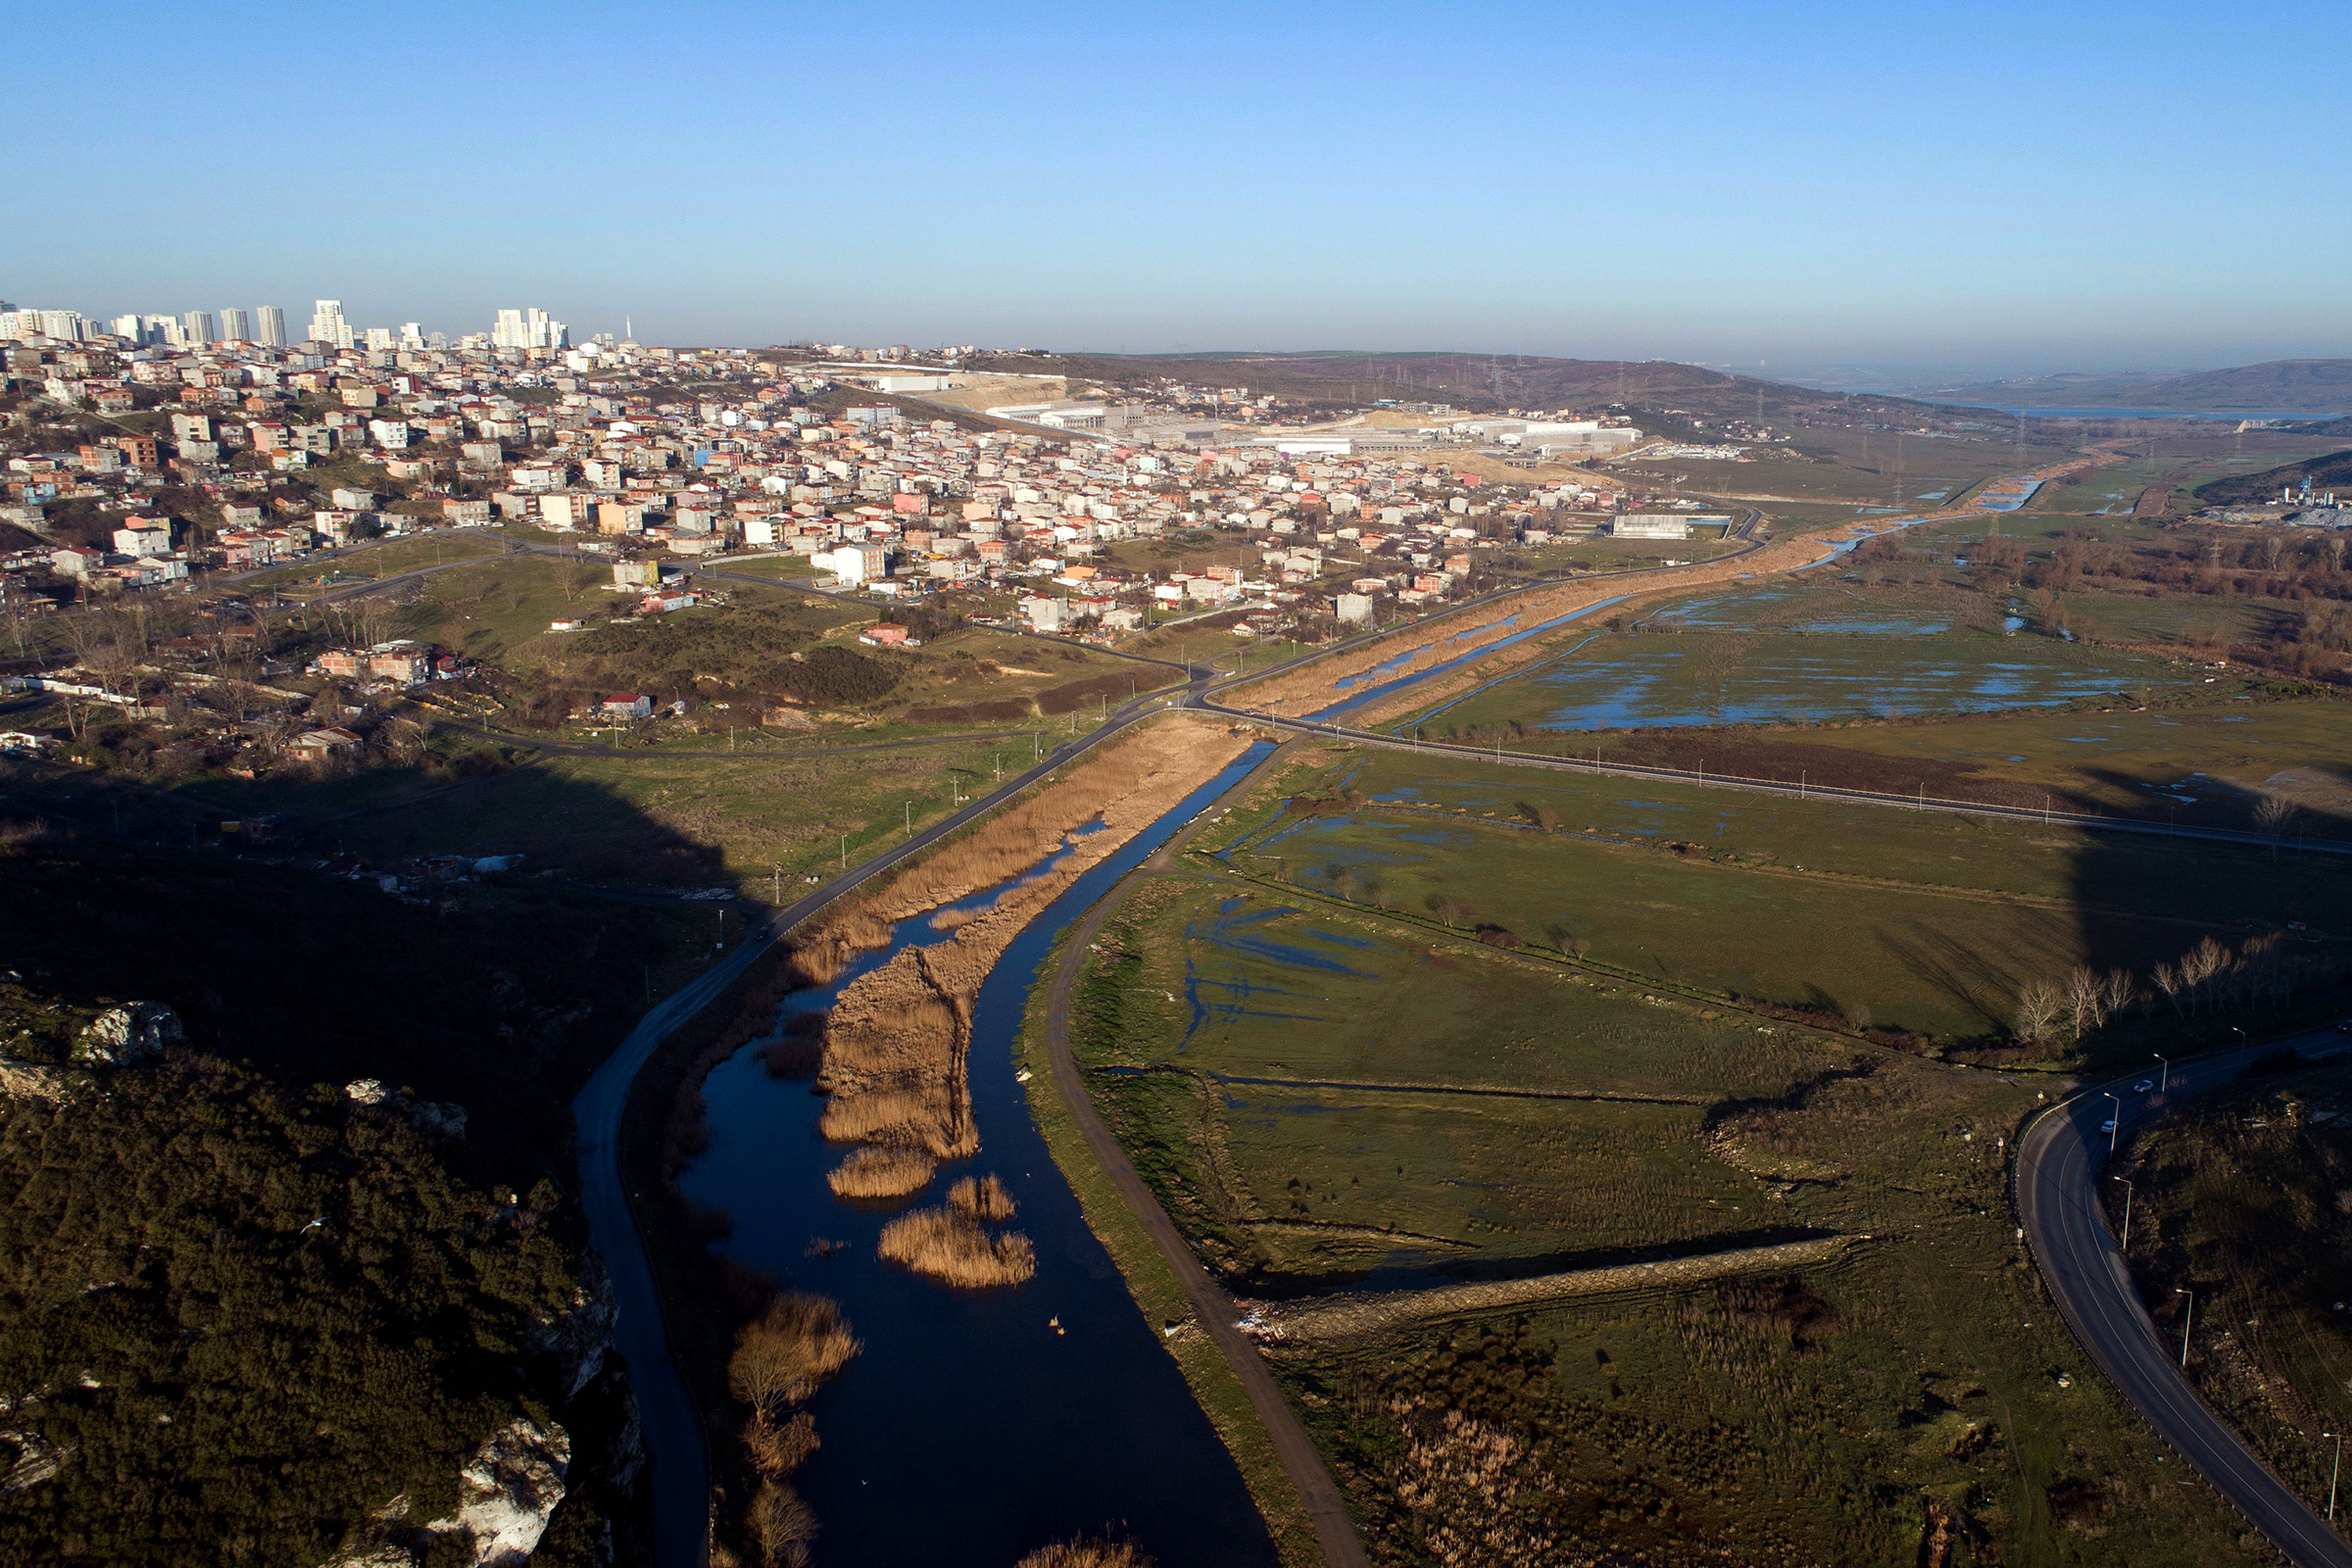 An aerial view of the Canal Istanbul project on Jan. 2, 2020. (Erdem Sahin—EPA-EFE/Shutterstock)